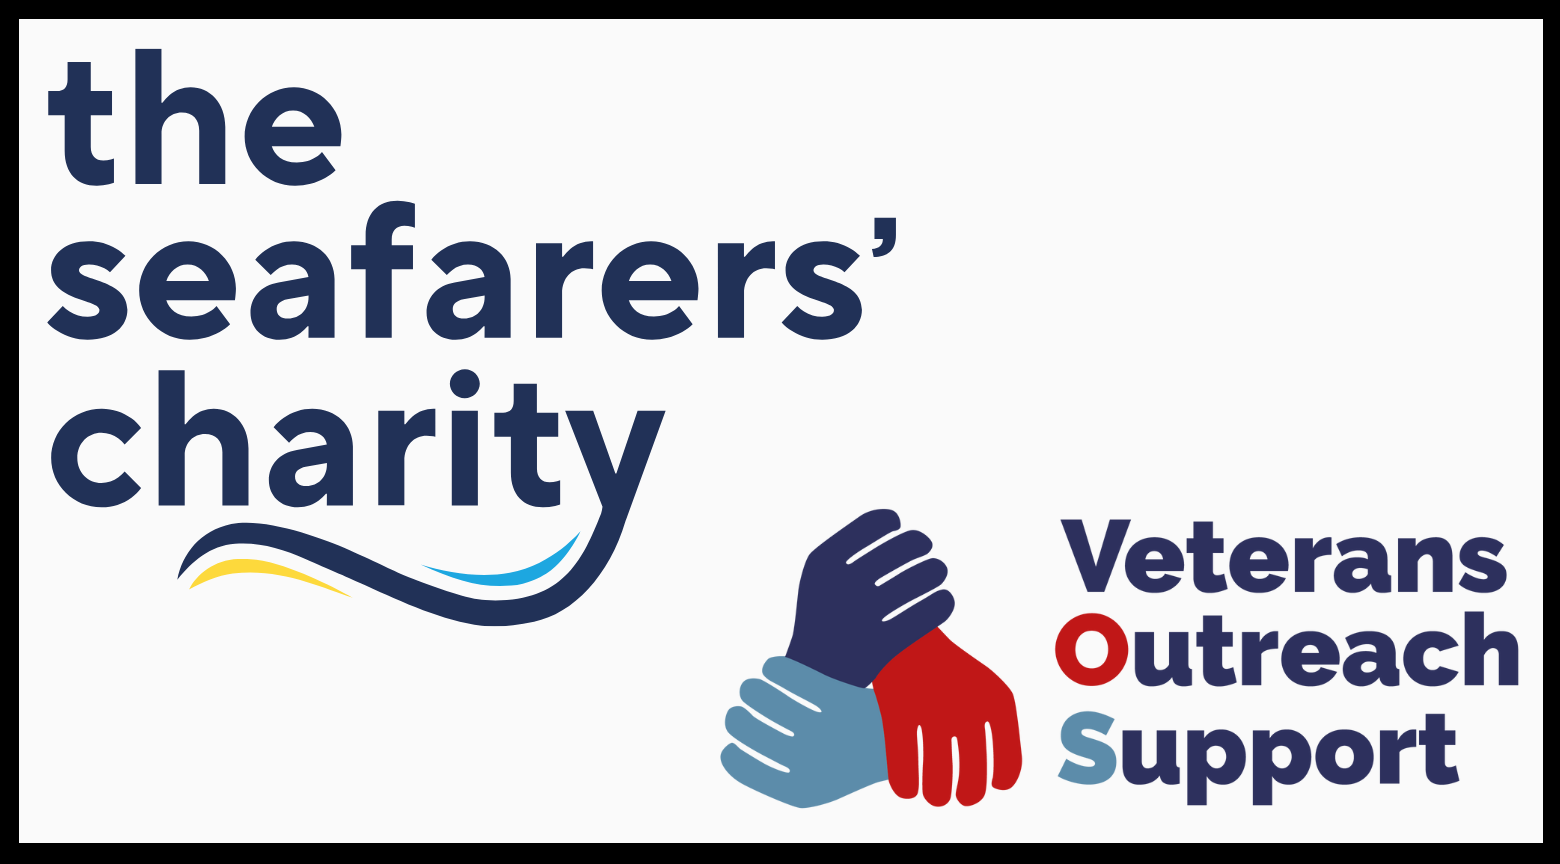 Merchant Navy Day with Veterans Outreach Support and The Seafarers' Charity